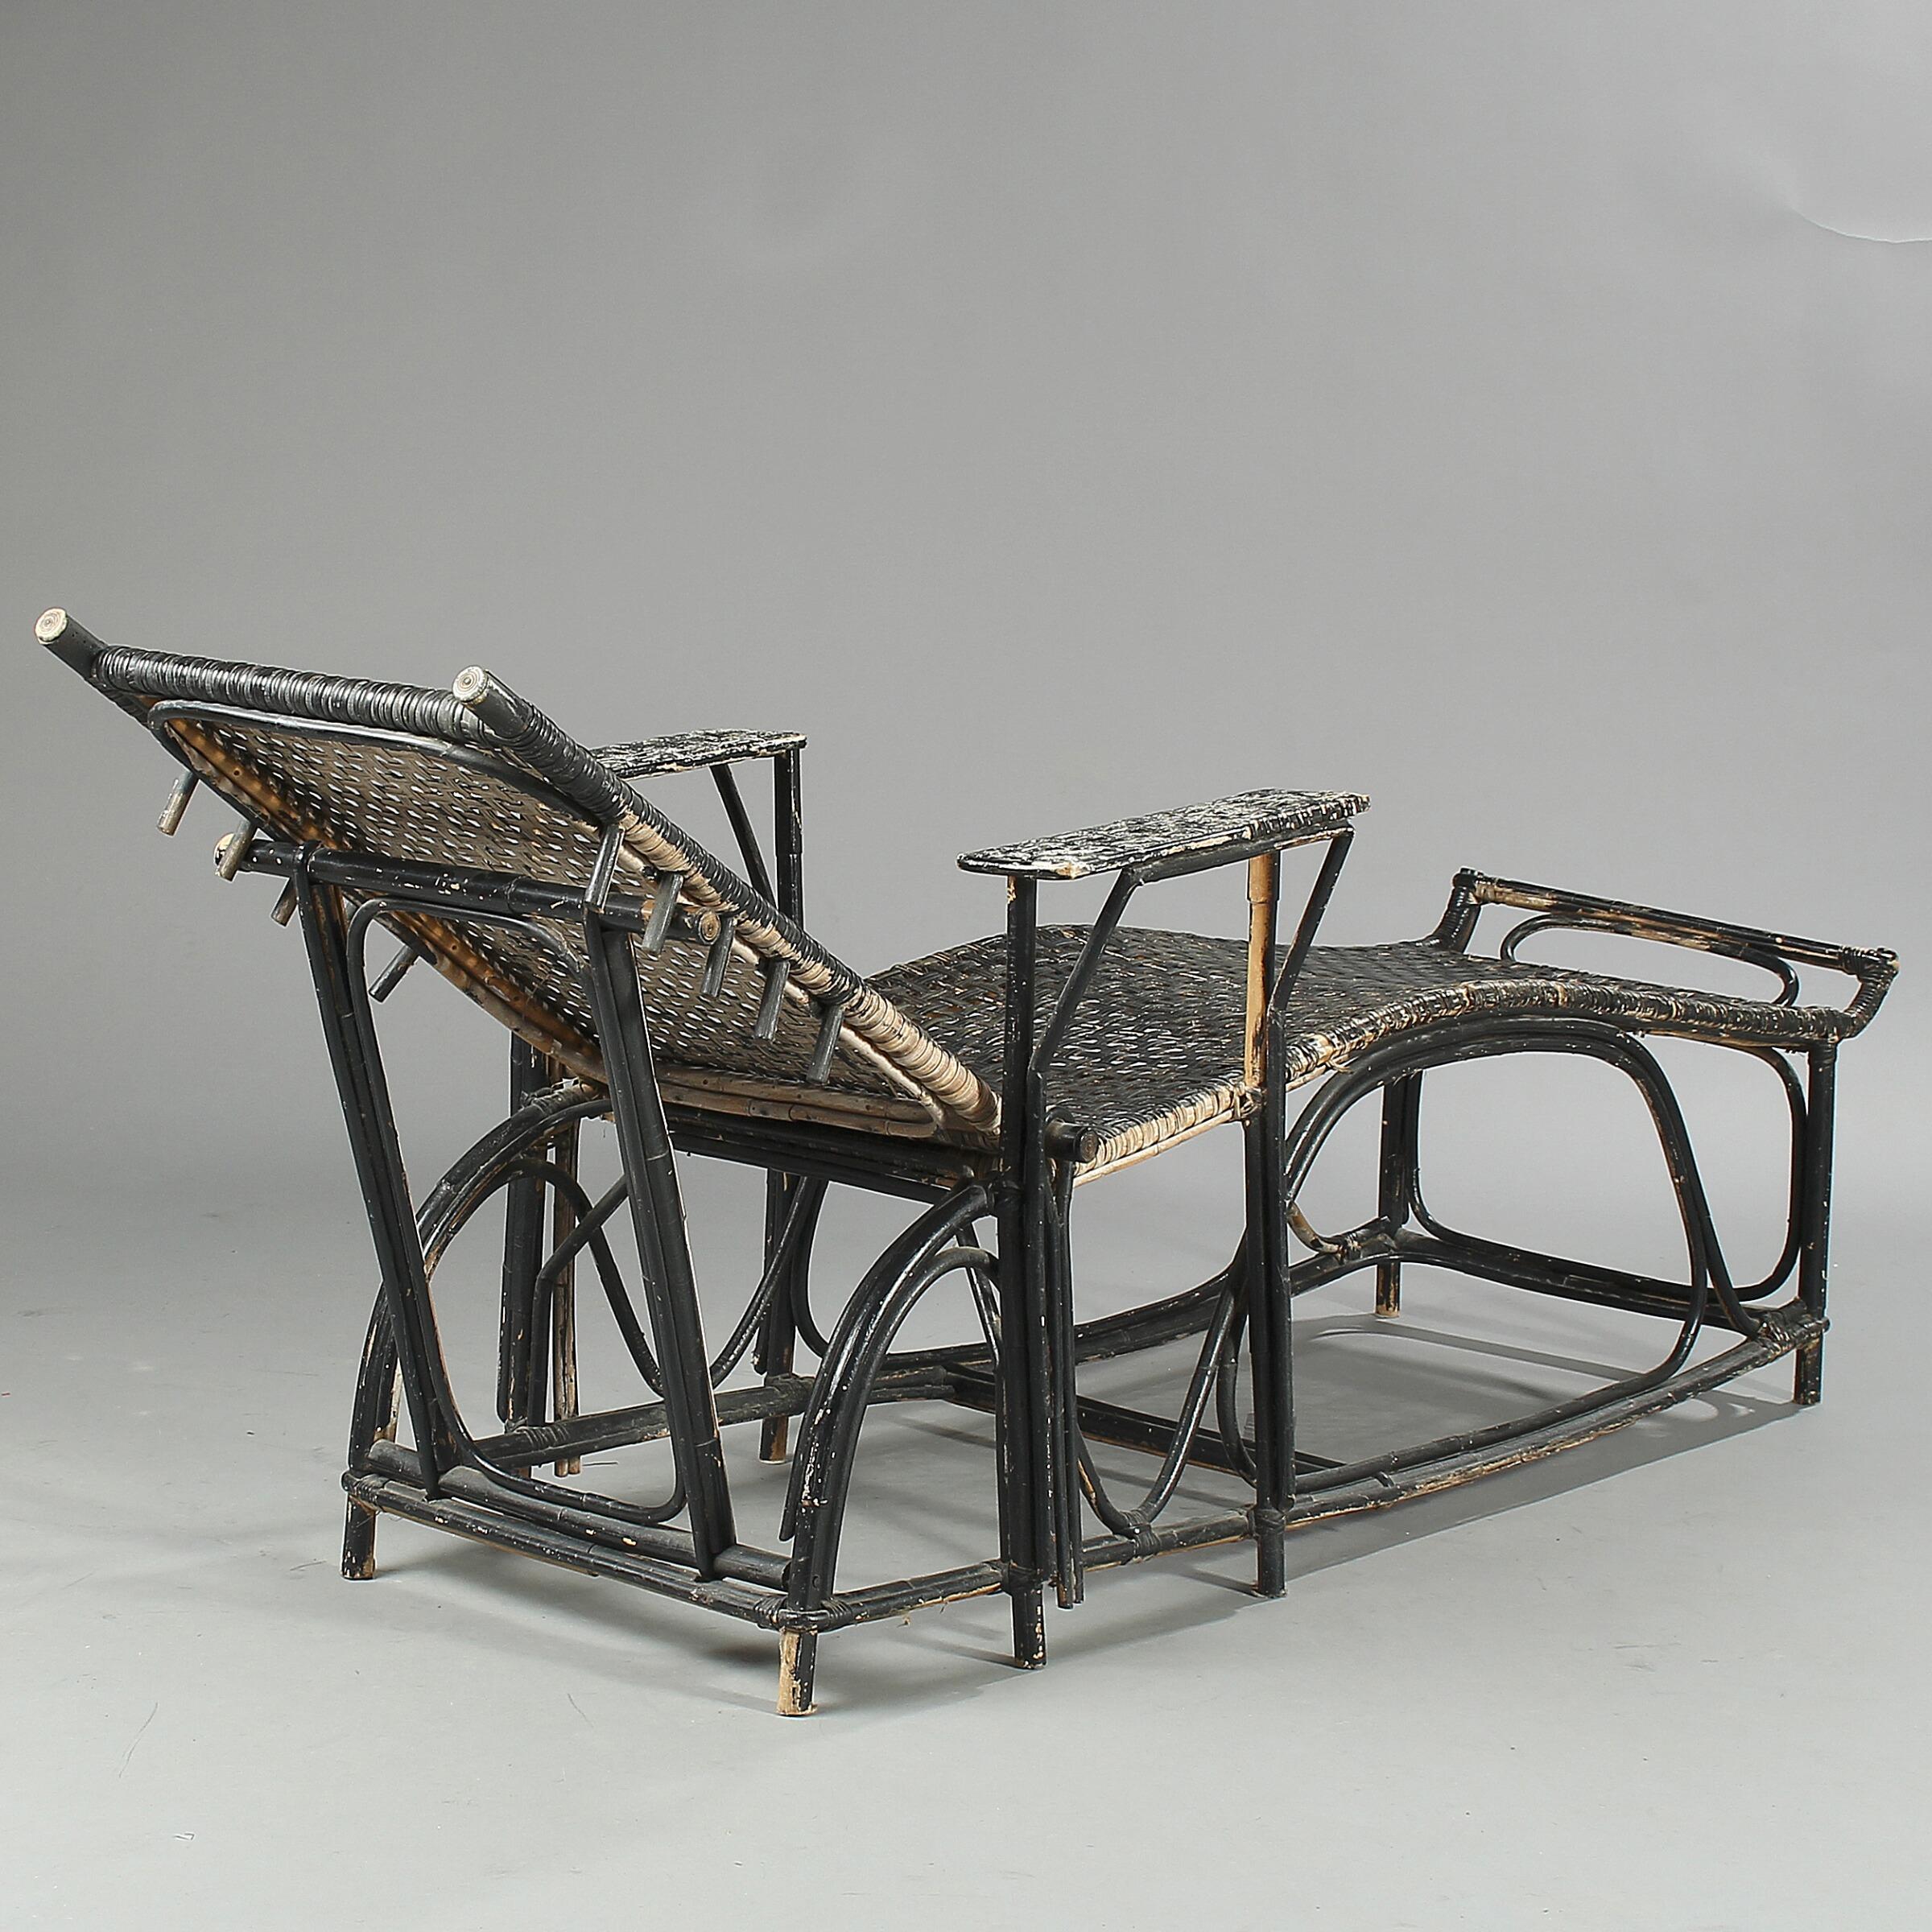 Sun lounger with black colored cane and rattan with adjustable back. Presumably manufactured by R. Wengler in the 1930s. Max. L. 201 cm. Rattan with wear and damages.

Literature: “Nyt Tidsskrift for Kunstindustri”, 1928. Similar model pictured